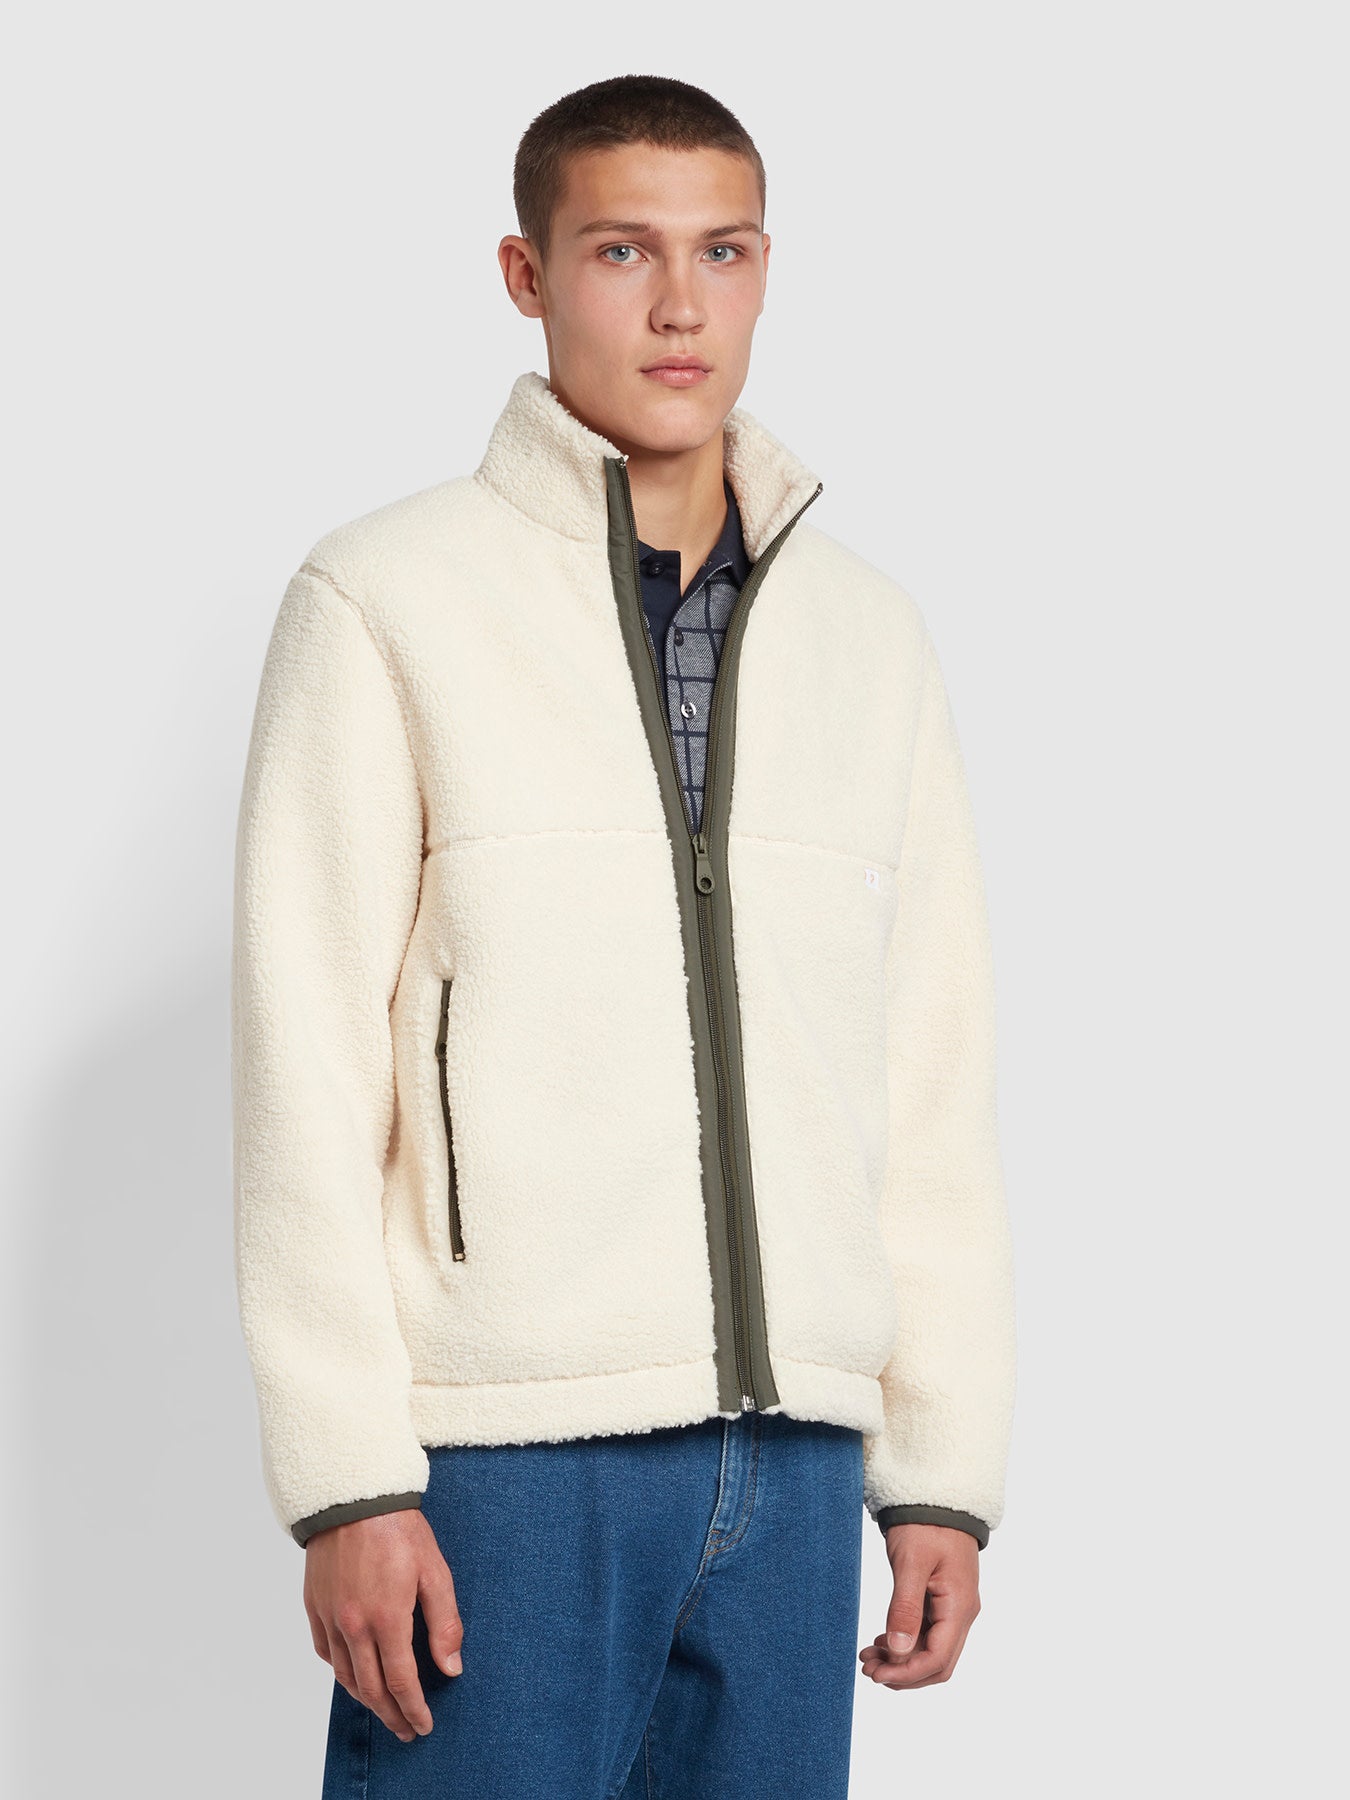 View Trenchton Full Zip Sherpa Jacket In Cream information